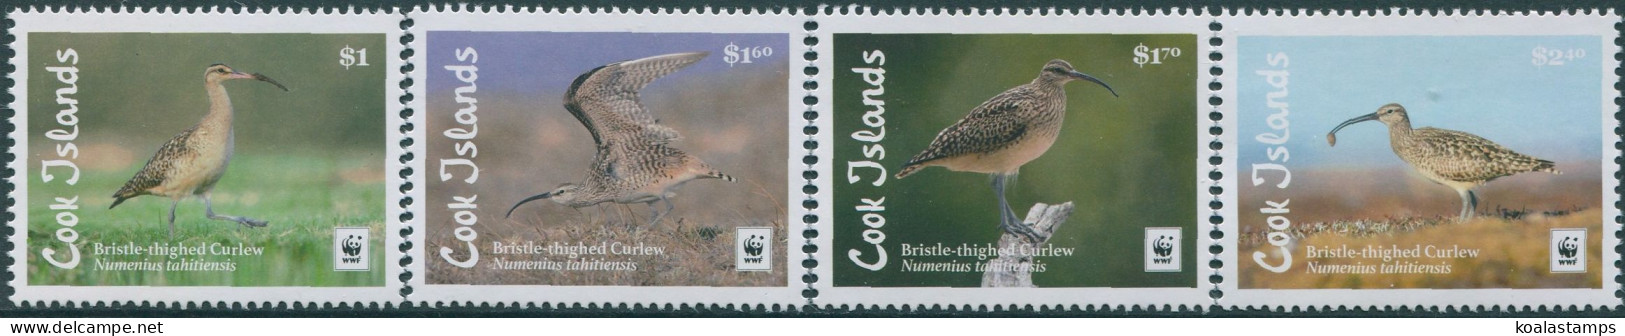 Cook Islands 2017 SG1927-1930 WWF Curlew Set MNH - Cook